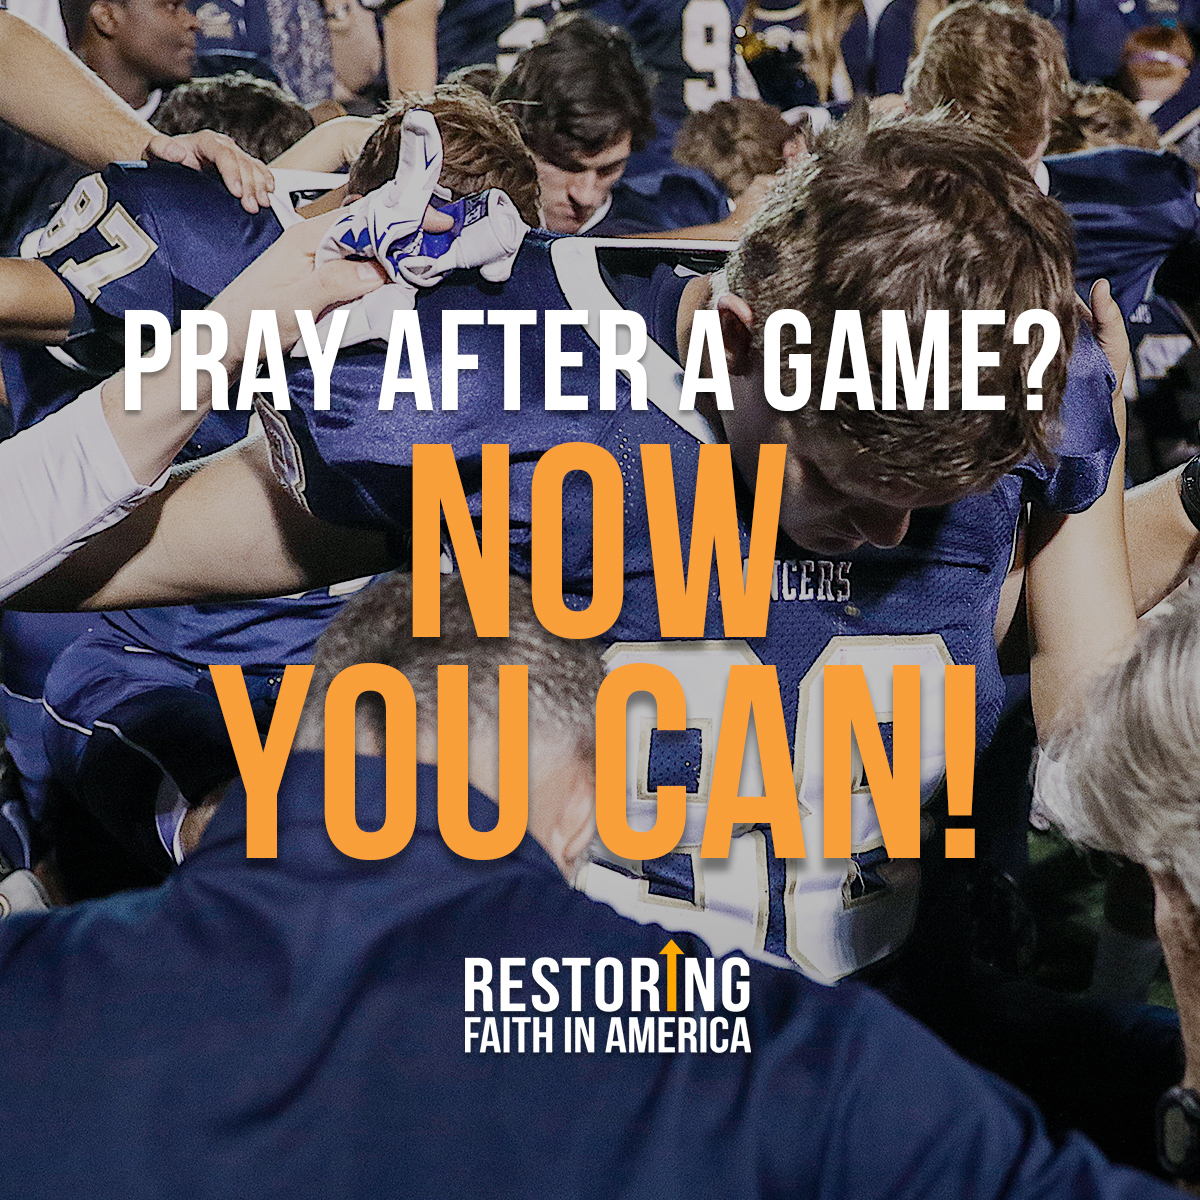 Pray Afer A Game | Now You Can | Restoring Faith in America